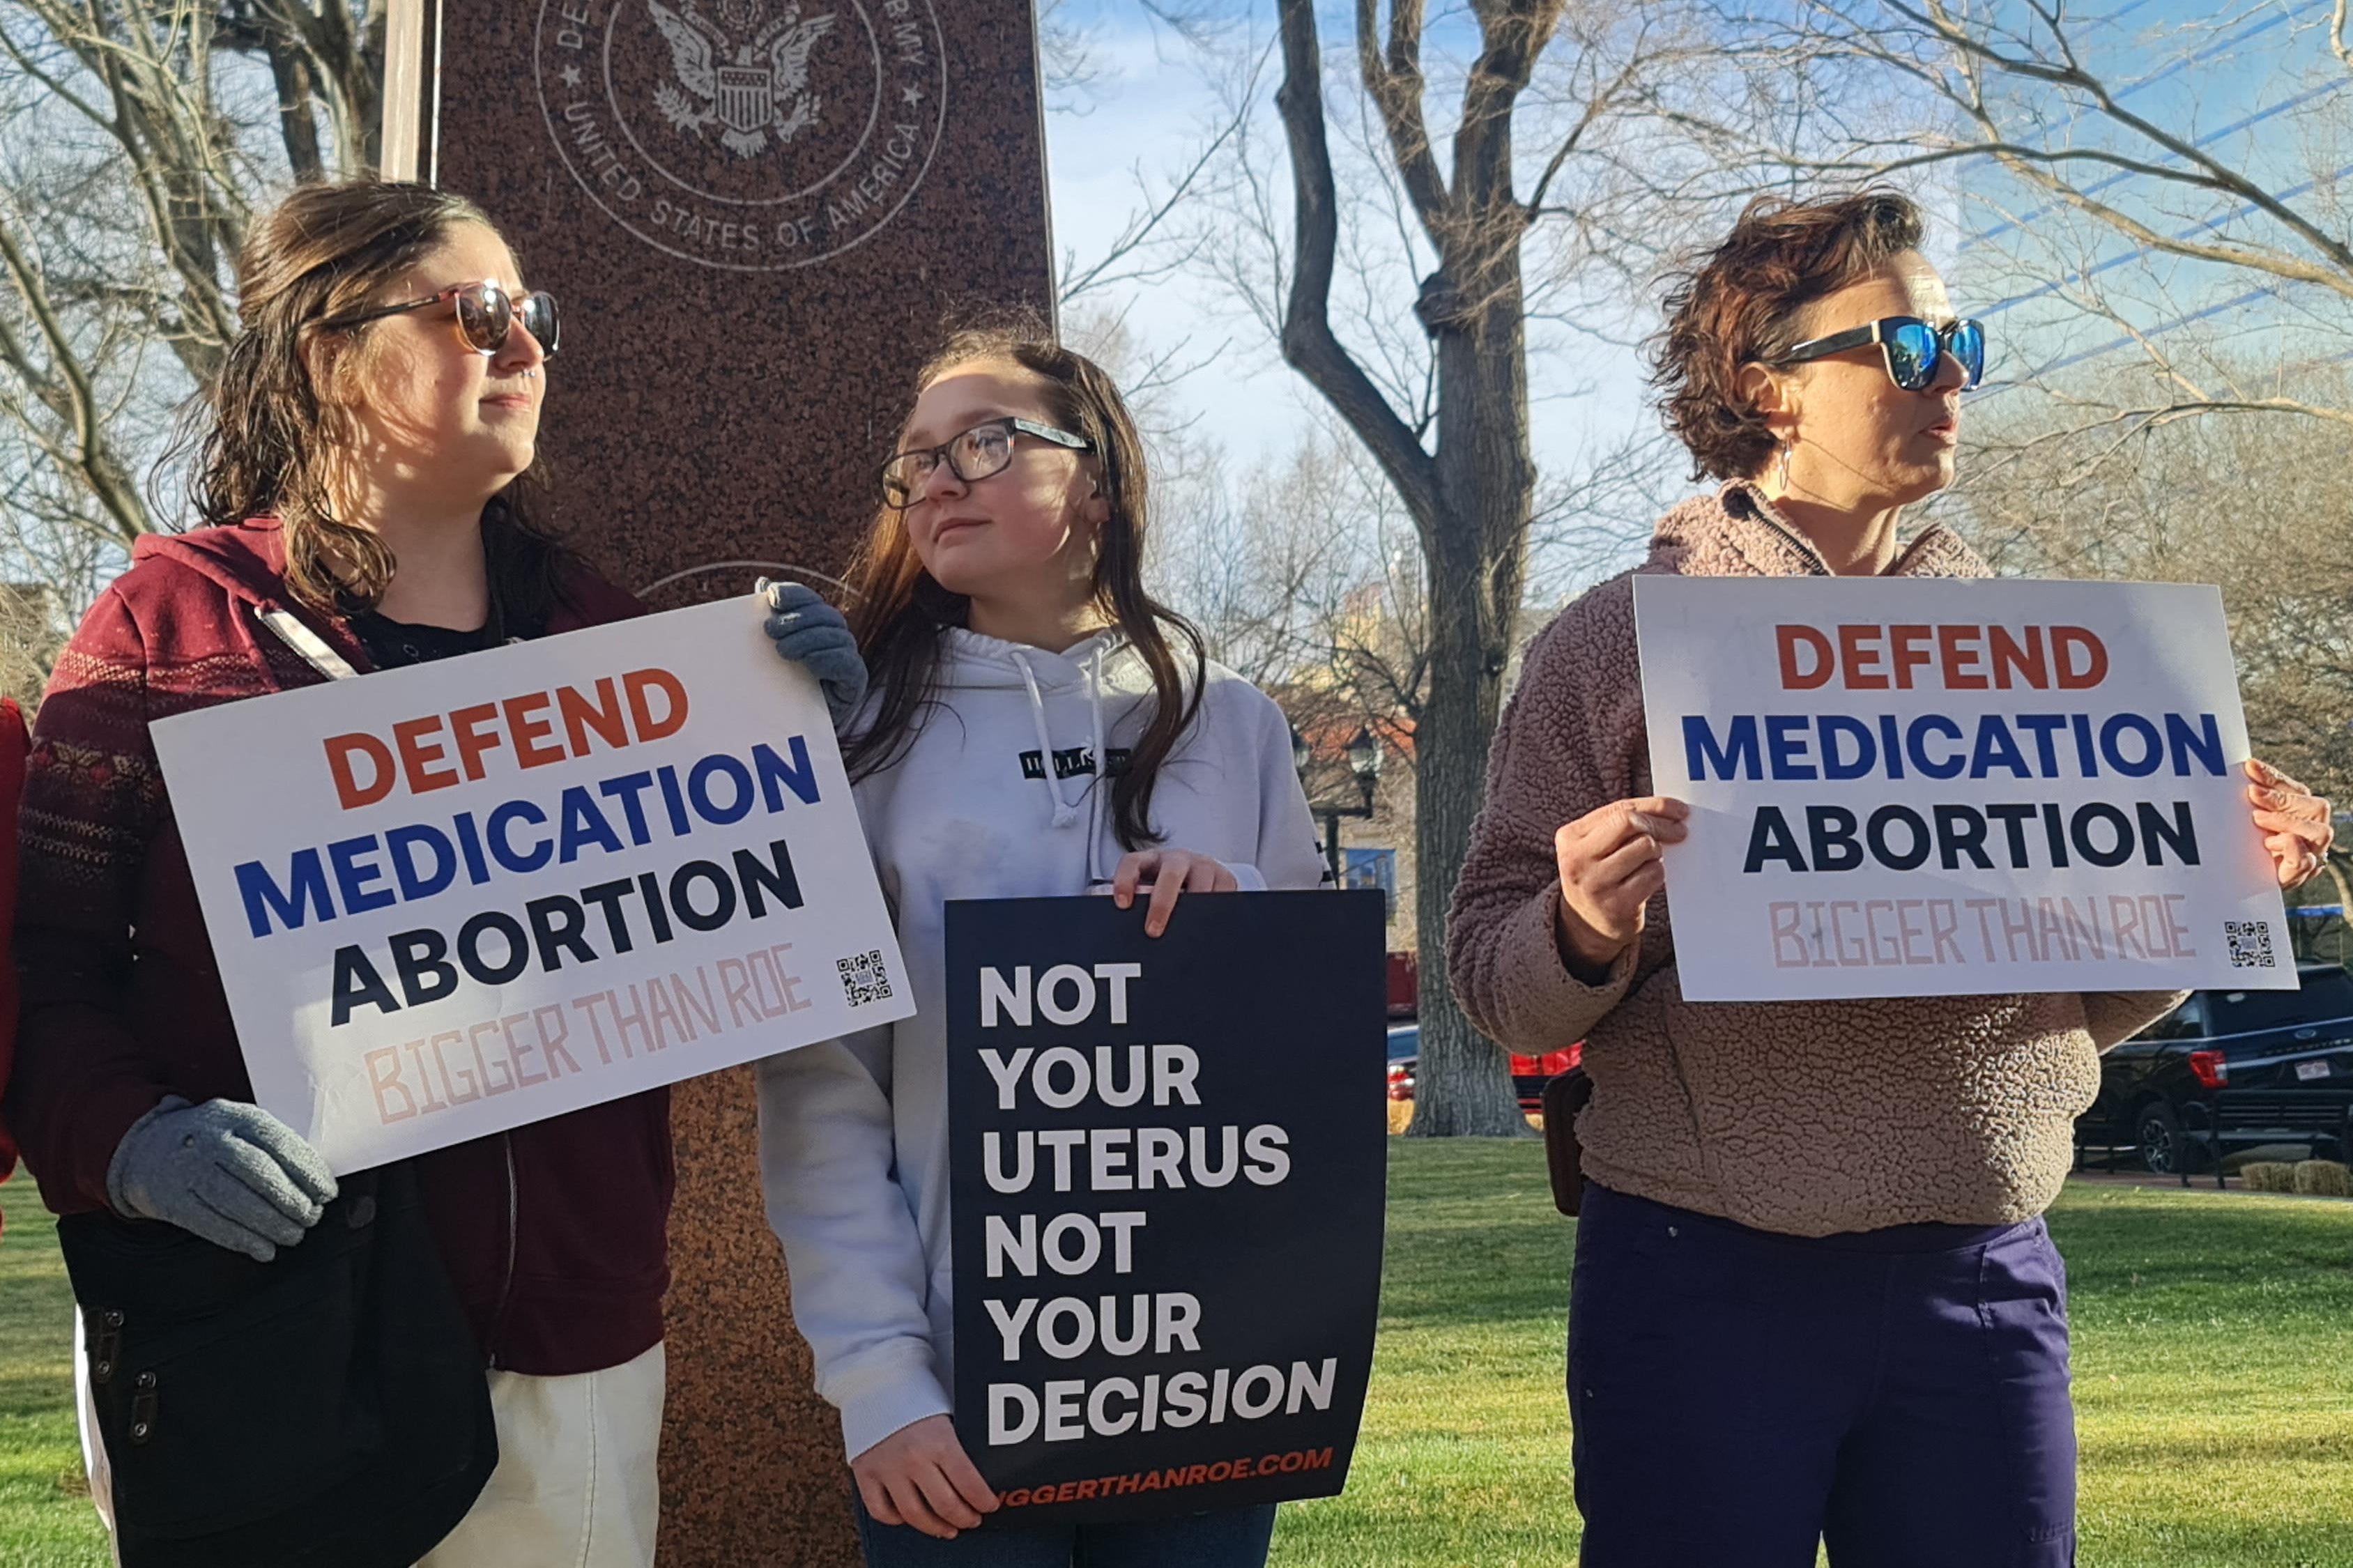 Women hold signs saying "Defend Medication Abortion"and "Not Your Uterus Not Your Decision" and "Bigger Than Roe."